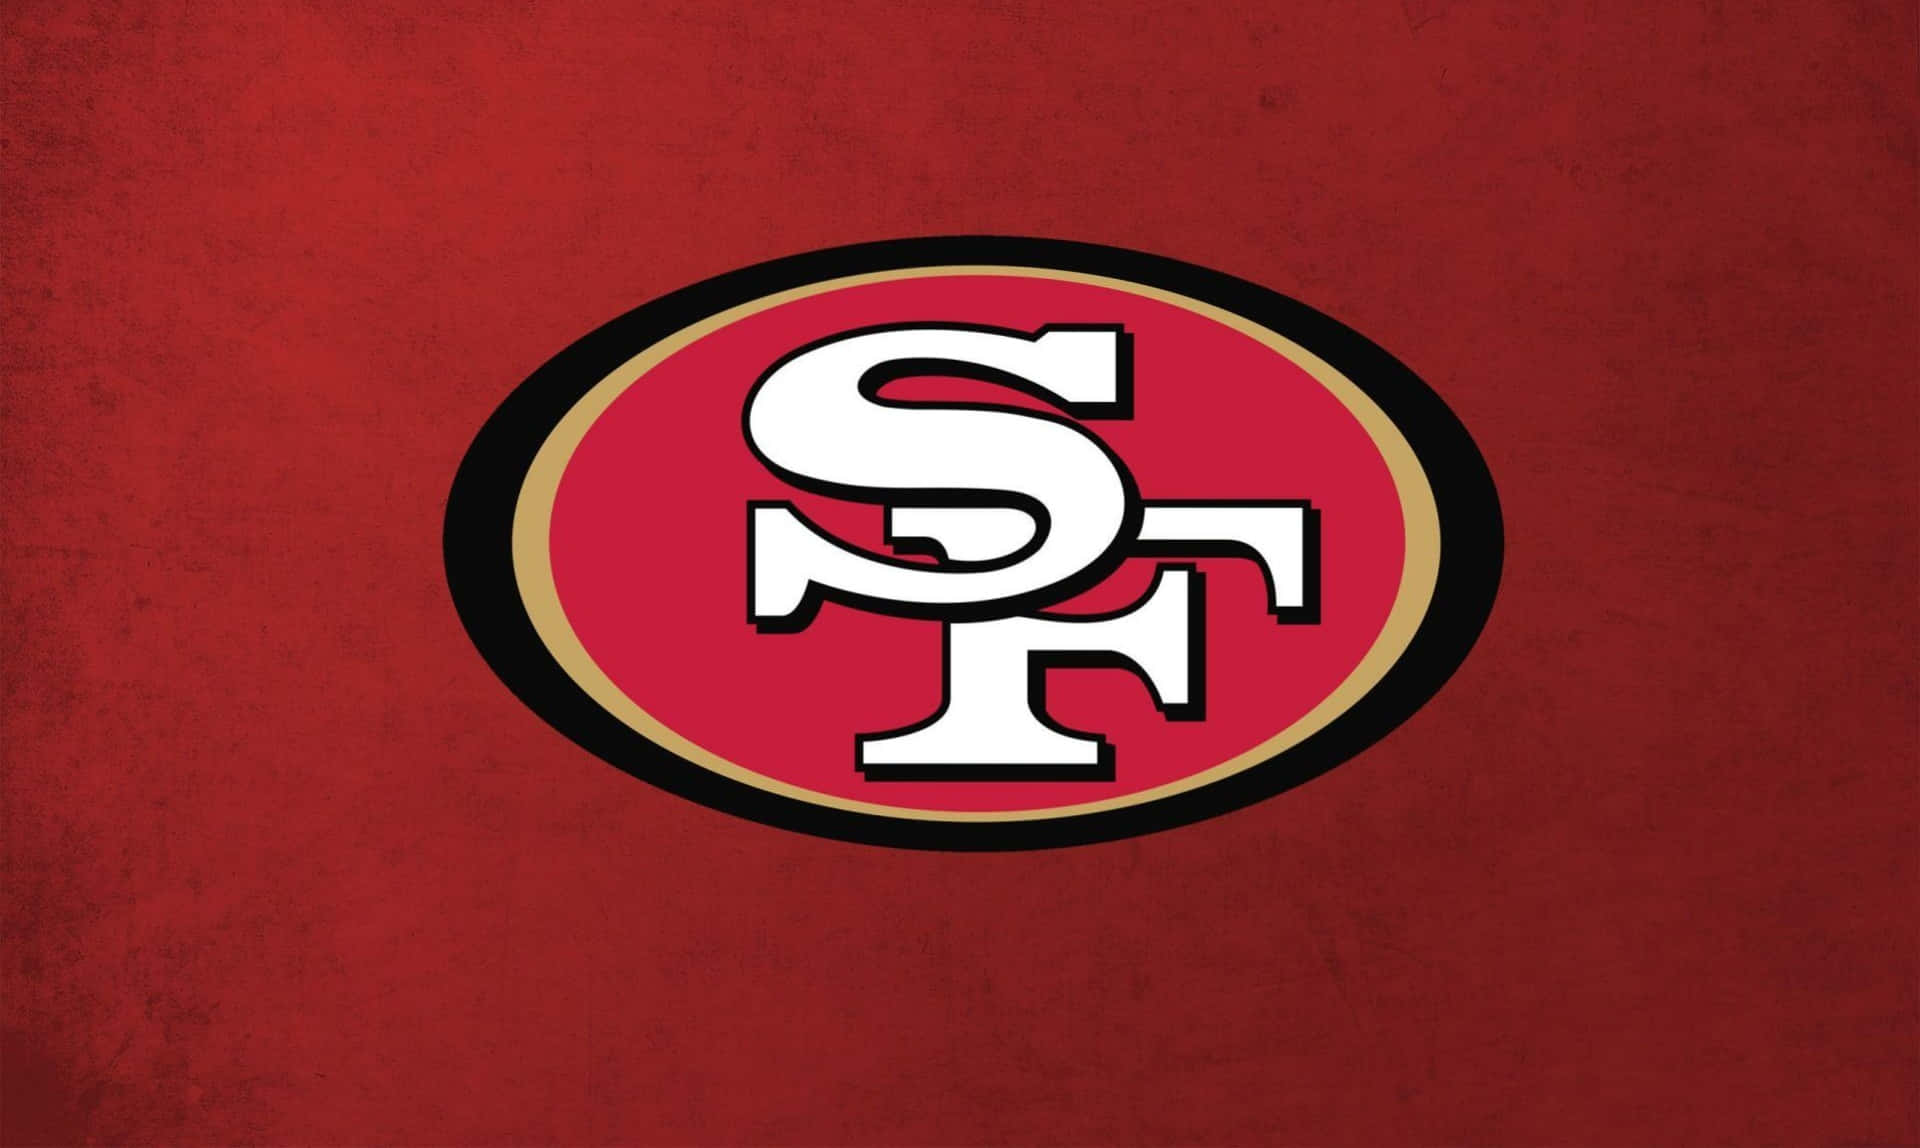 Sanfrancisco 49ers Logo In German Would Be 